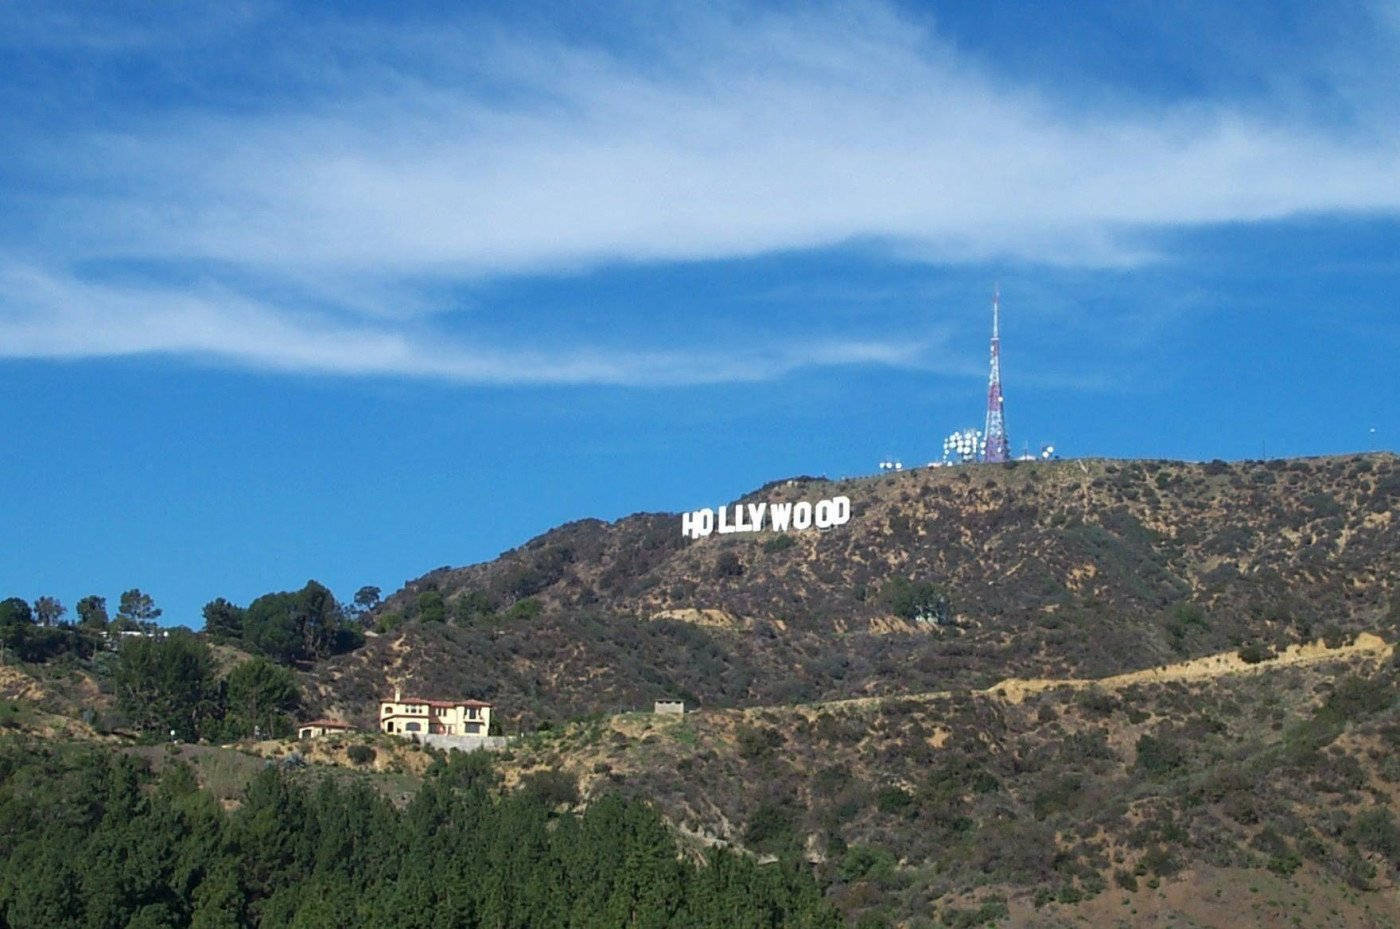 Download Far View Of Hollywood Sign Wallpaper | Wallpapers.com